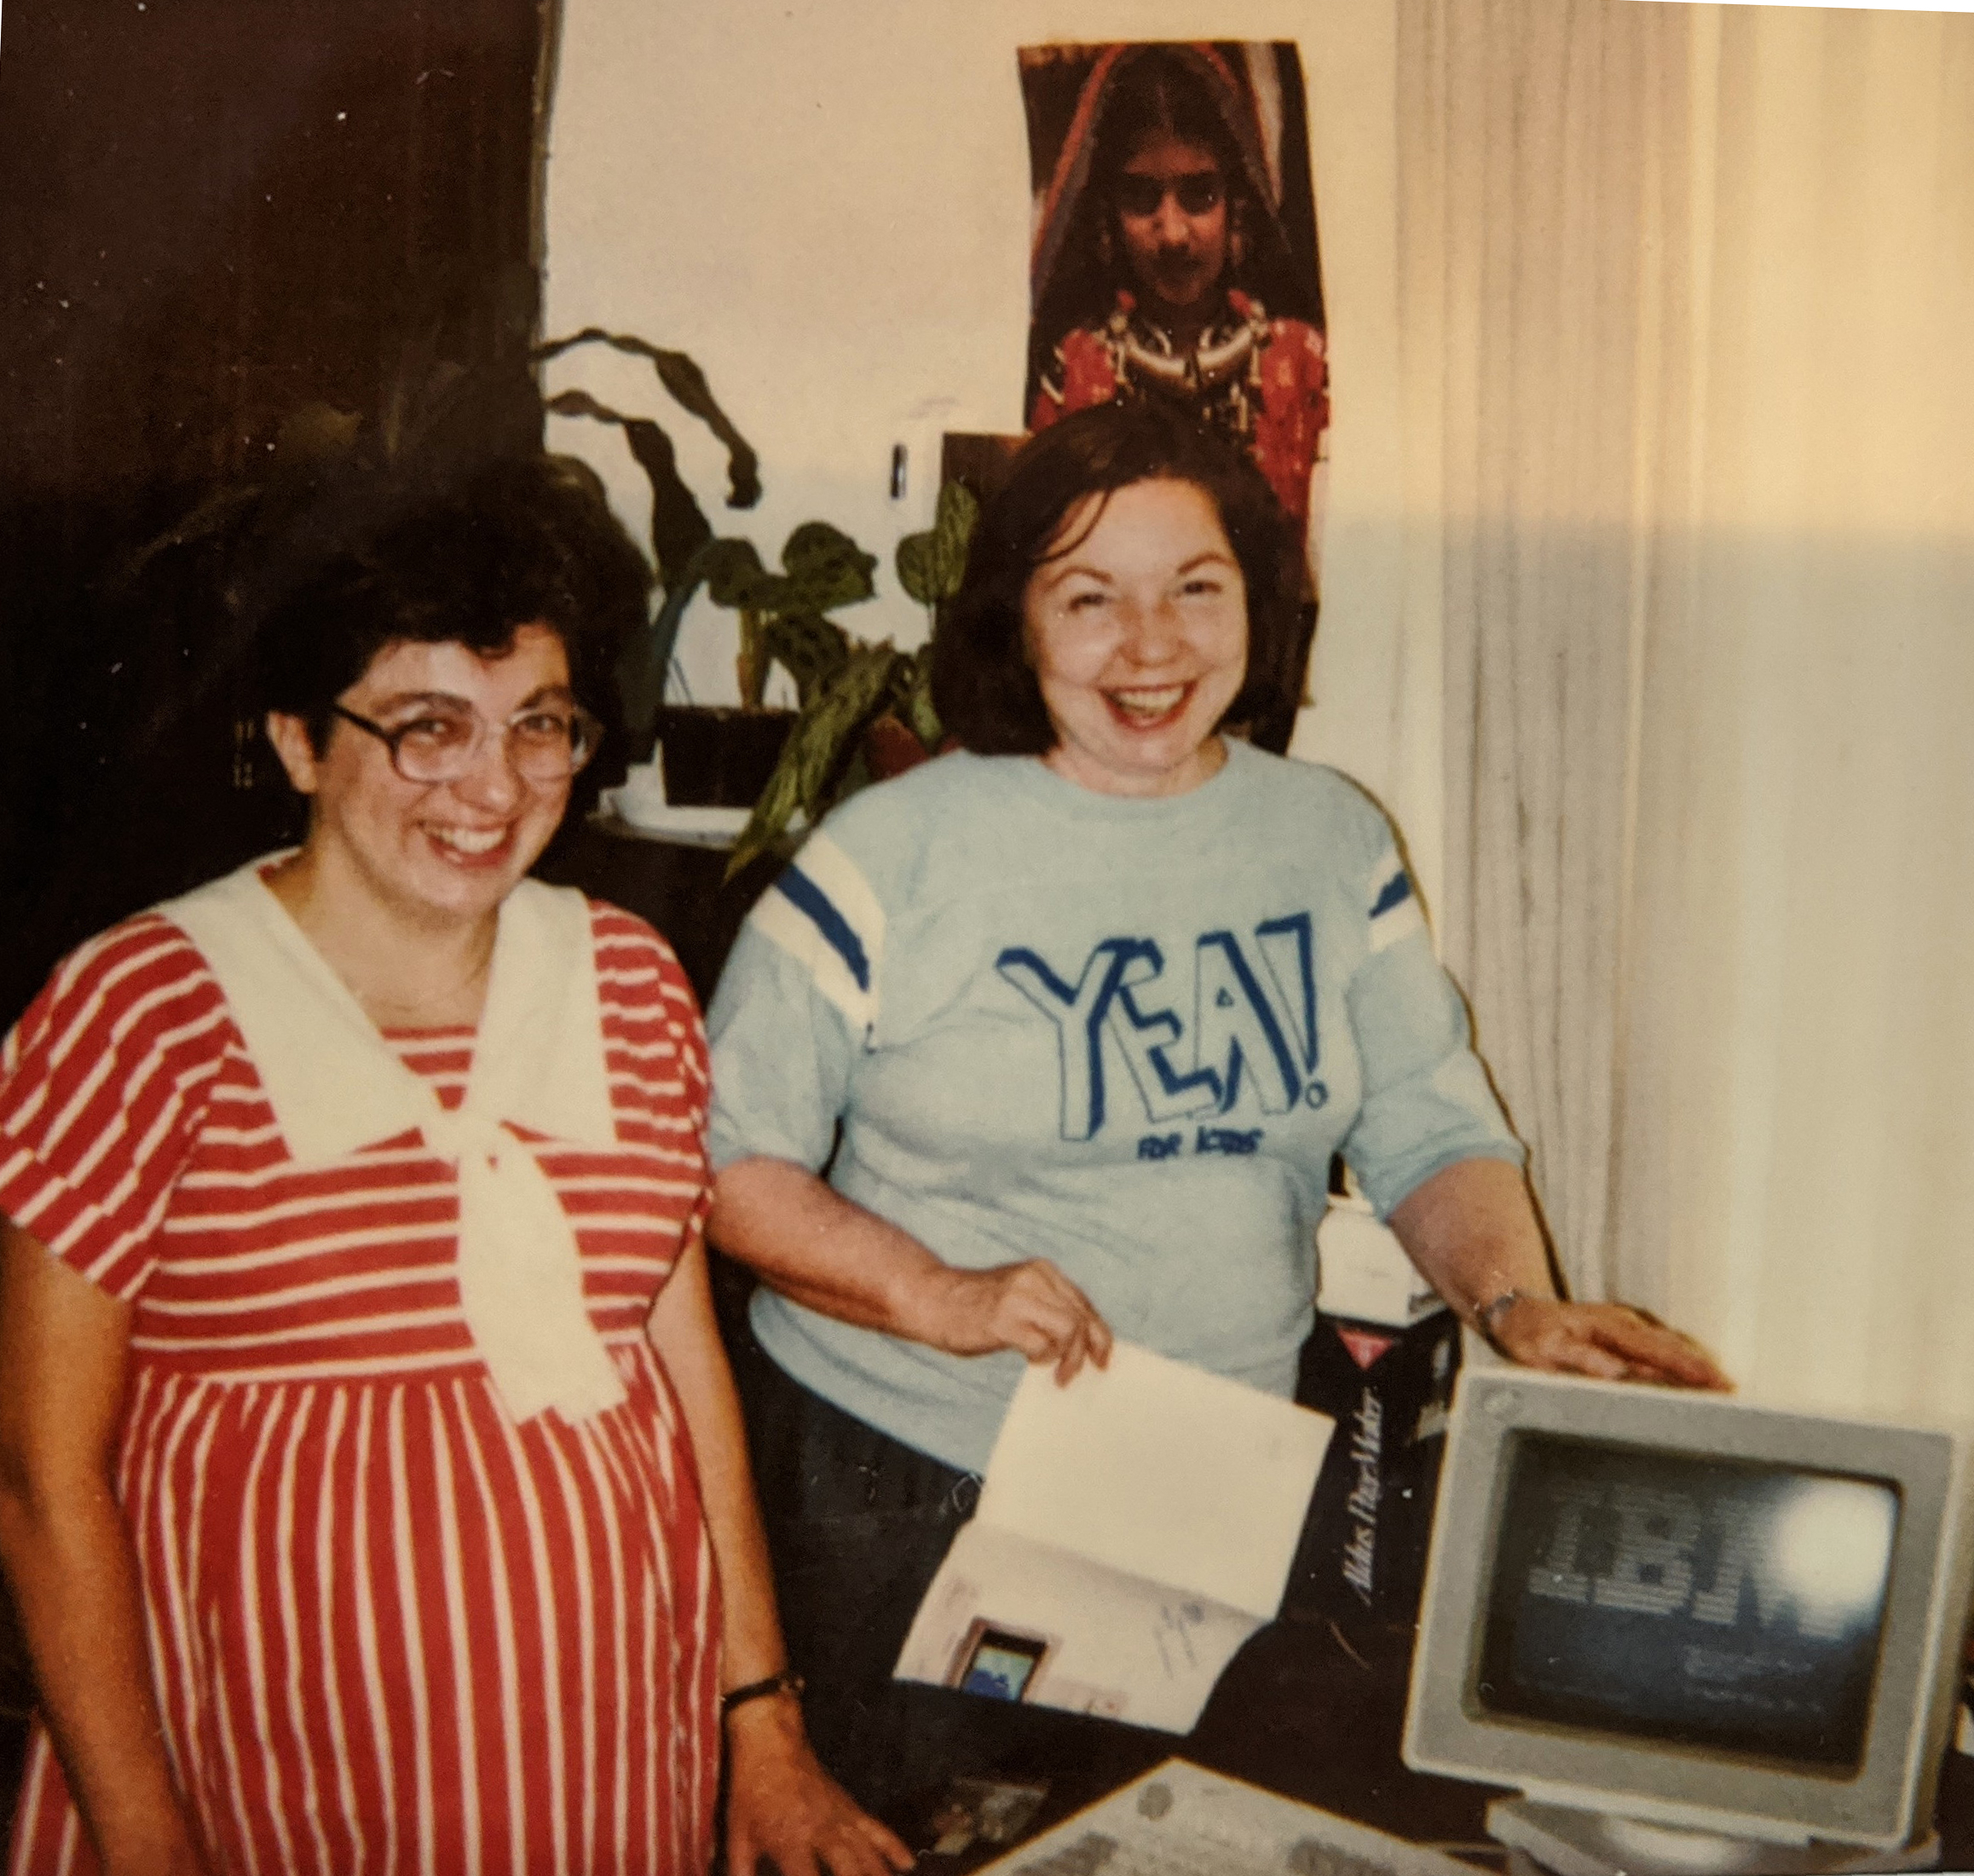 Miller and Gaines in 1988 post with new IBM computer